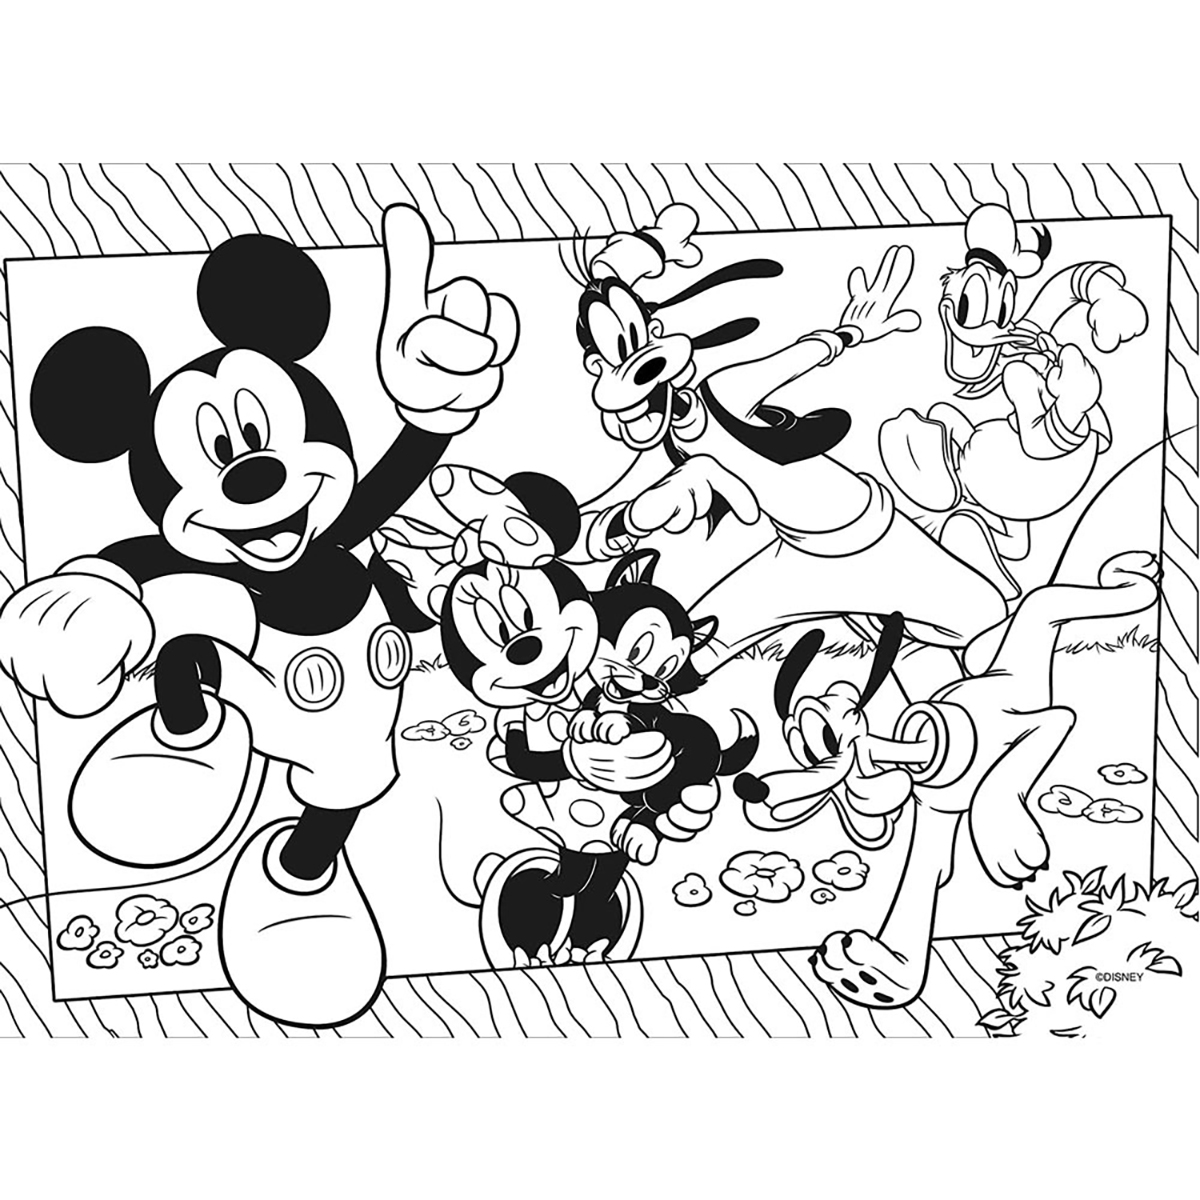 MICKEY MOUSE ECO-Ausmal-Puzzle Boden 60 von Teile, Micky Lisciani Puzzle Maus